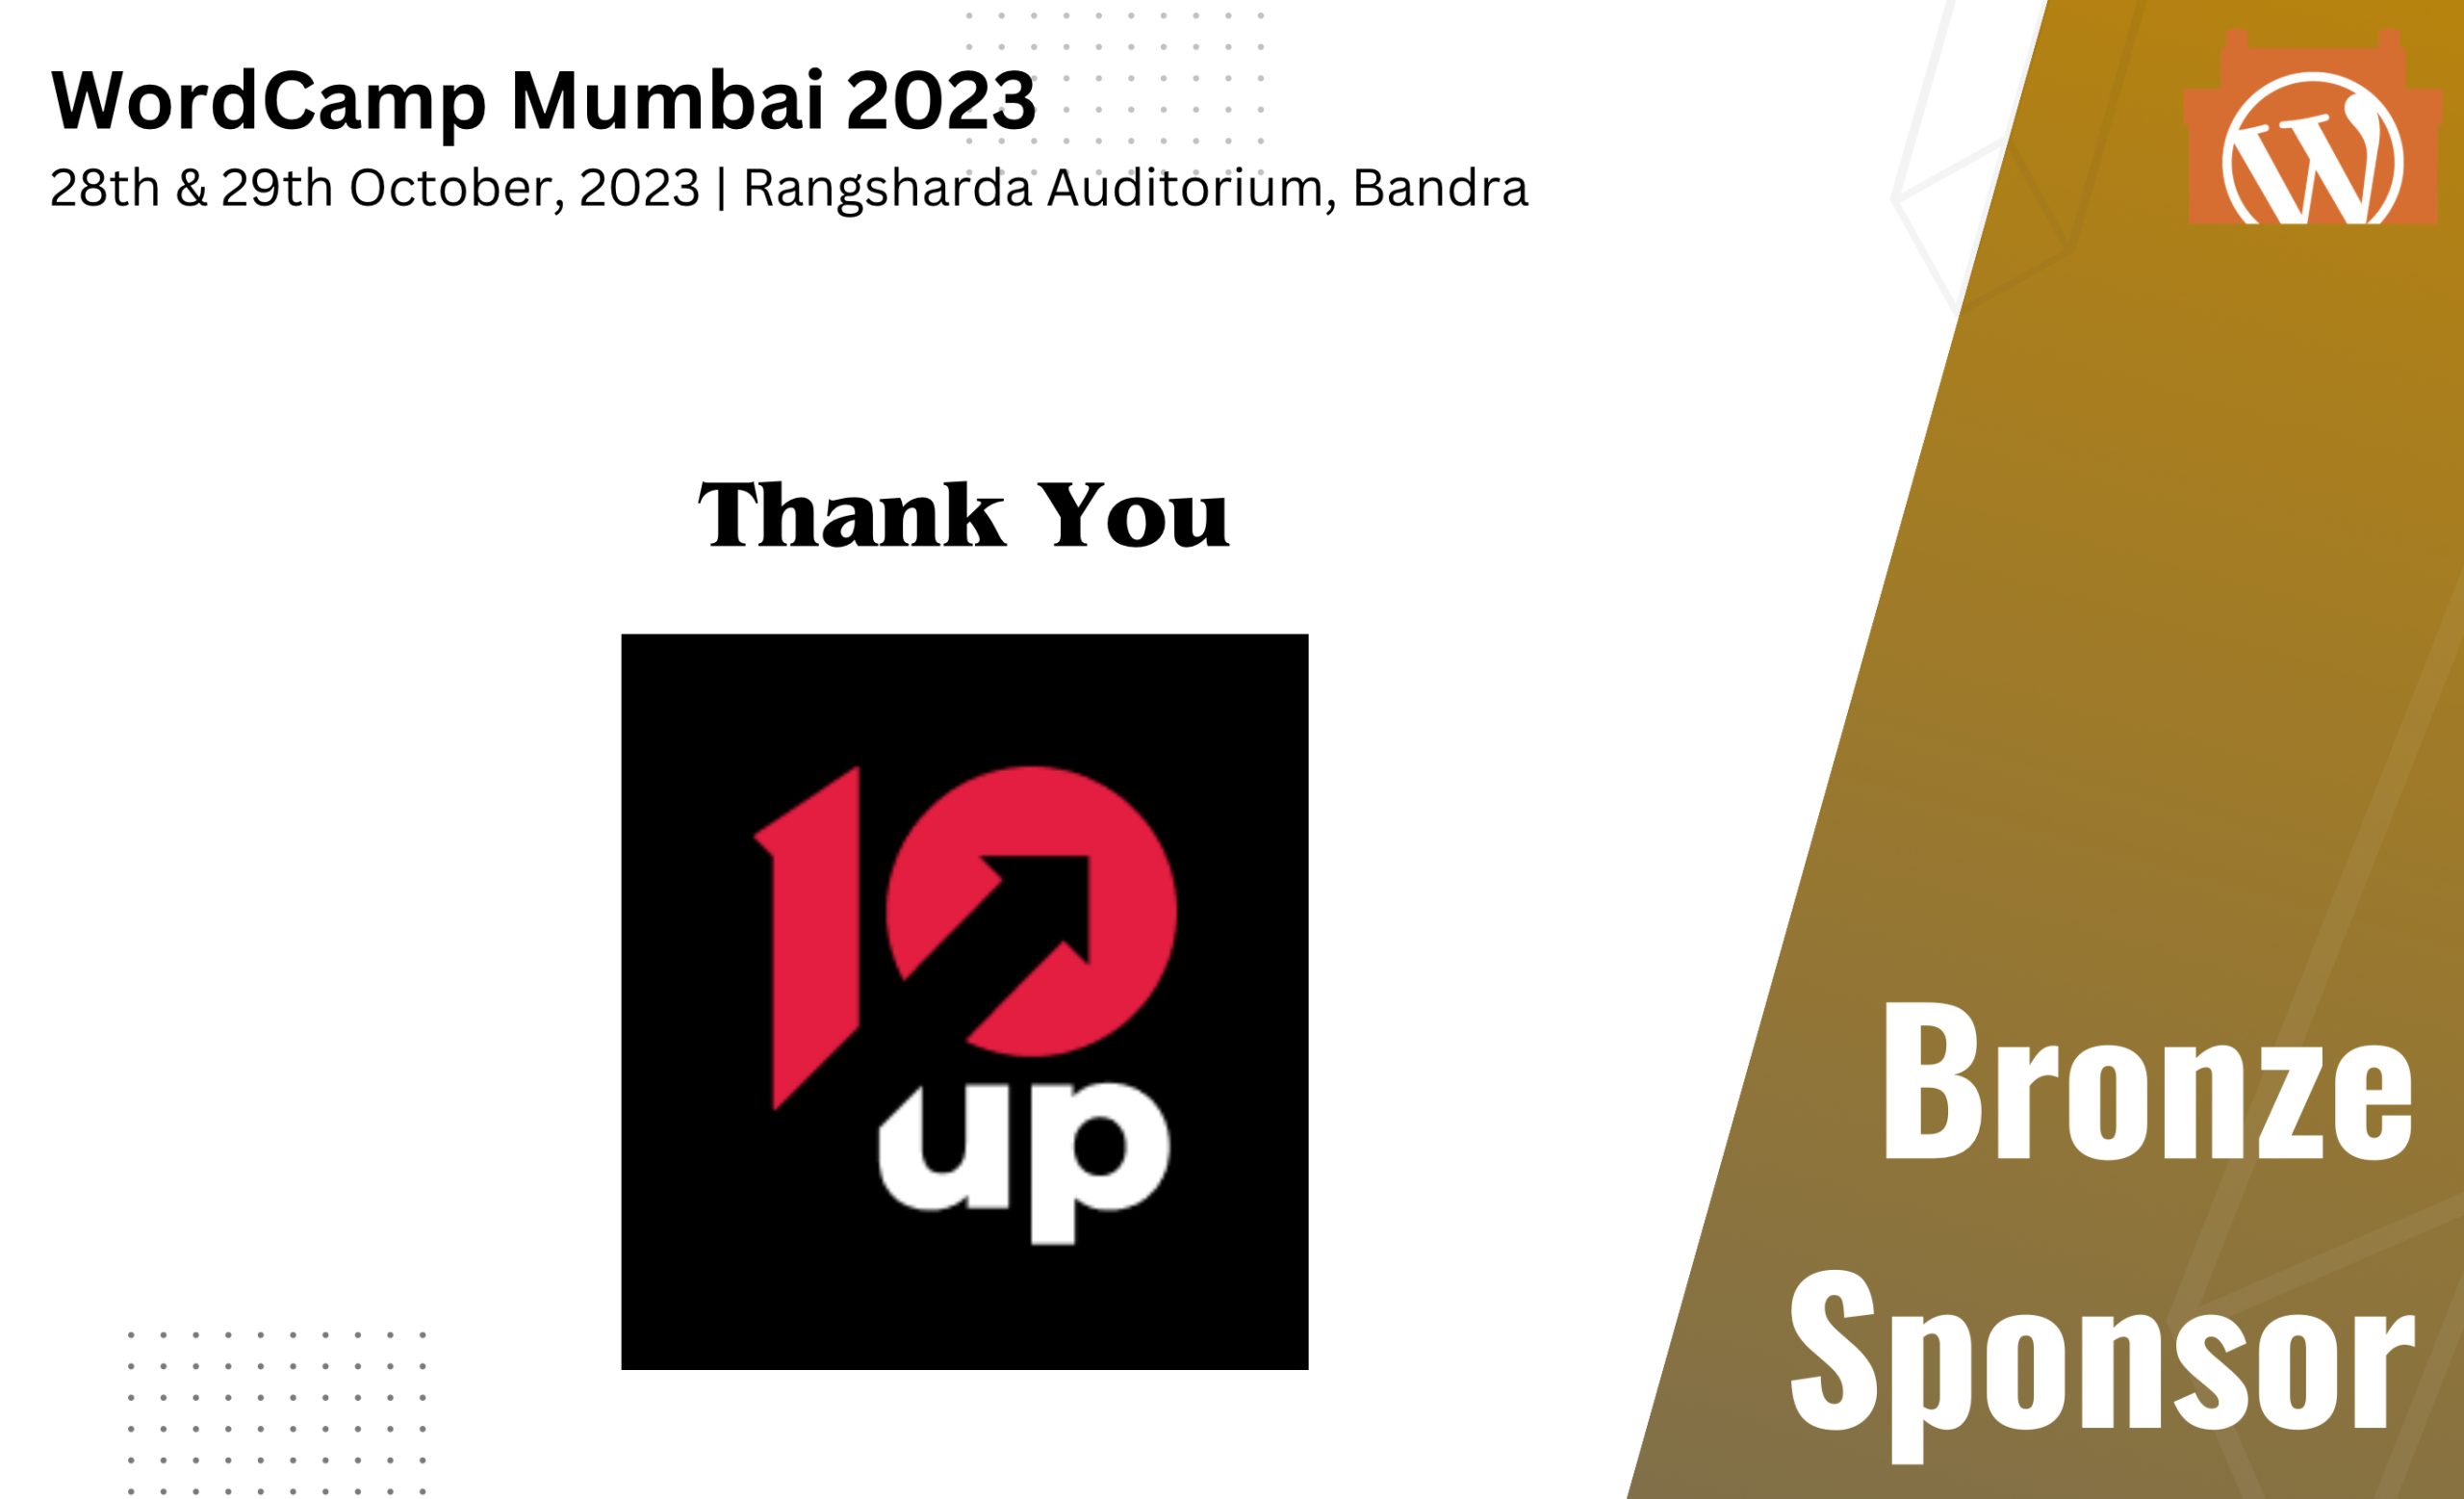 Thank You 10up, for being our Bronze Sponsor